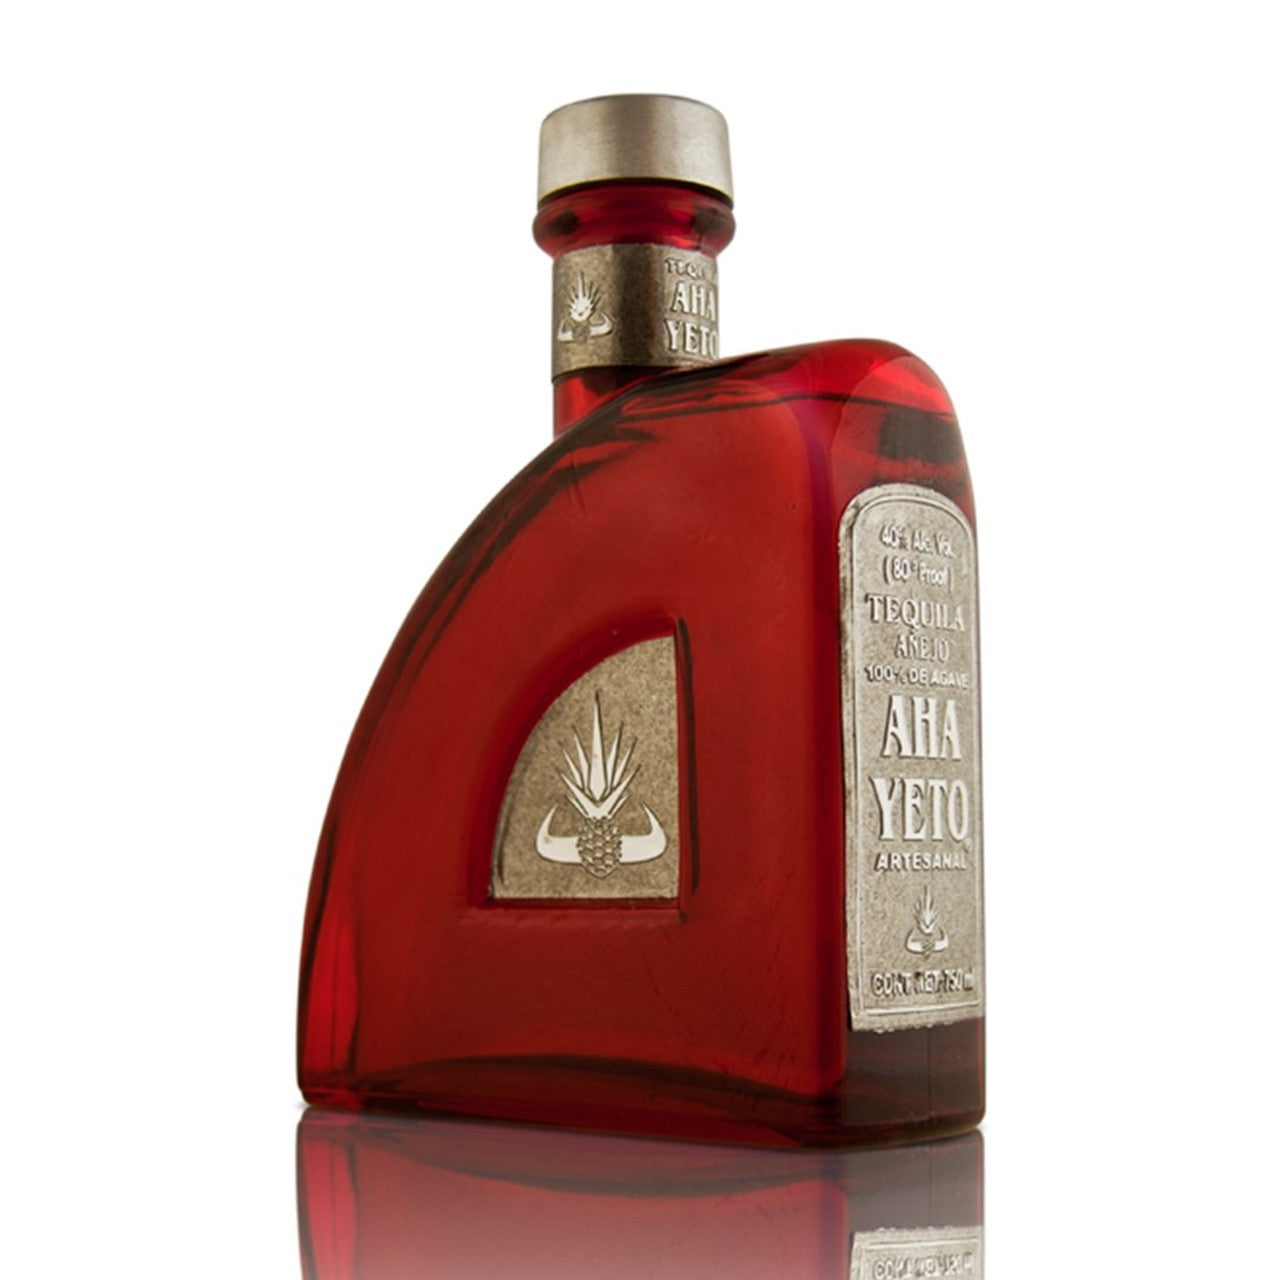 [BUY] Aha Yeto Anejo Artesenal Tequila (RECOMMENDED) at Cask Cartel ...